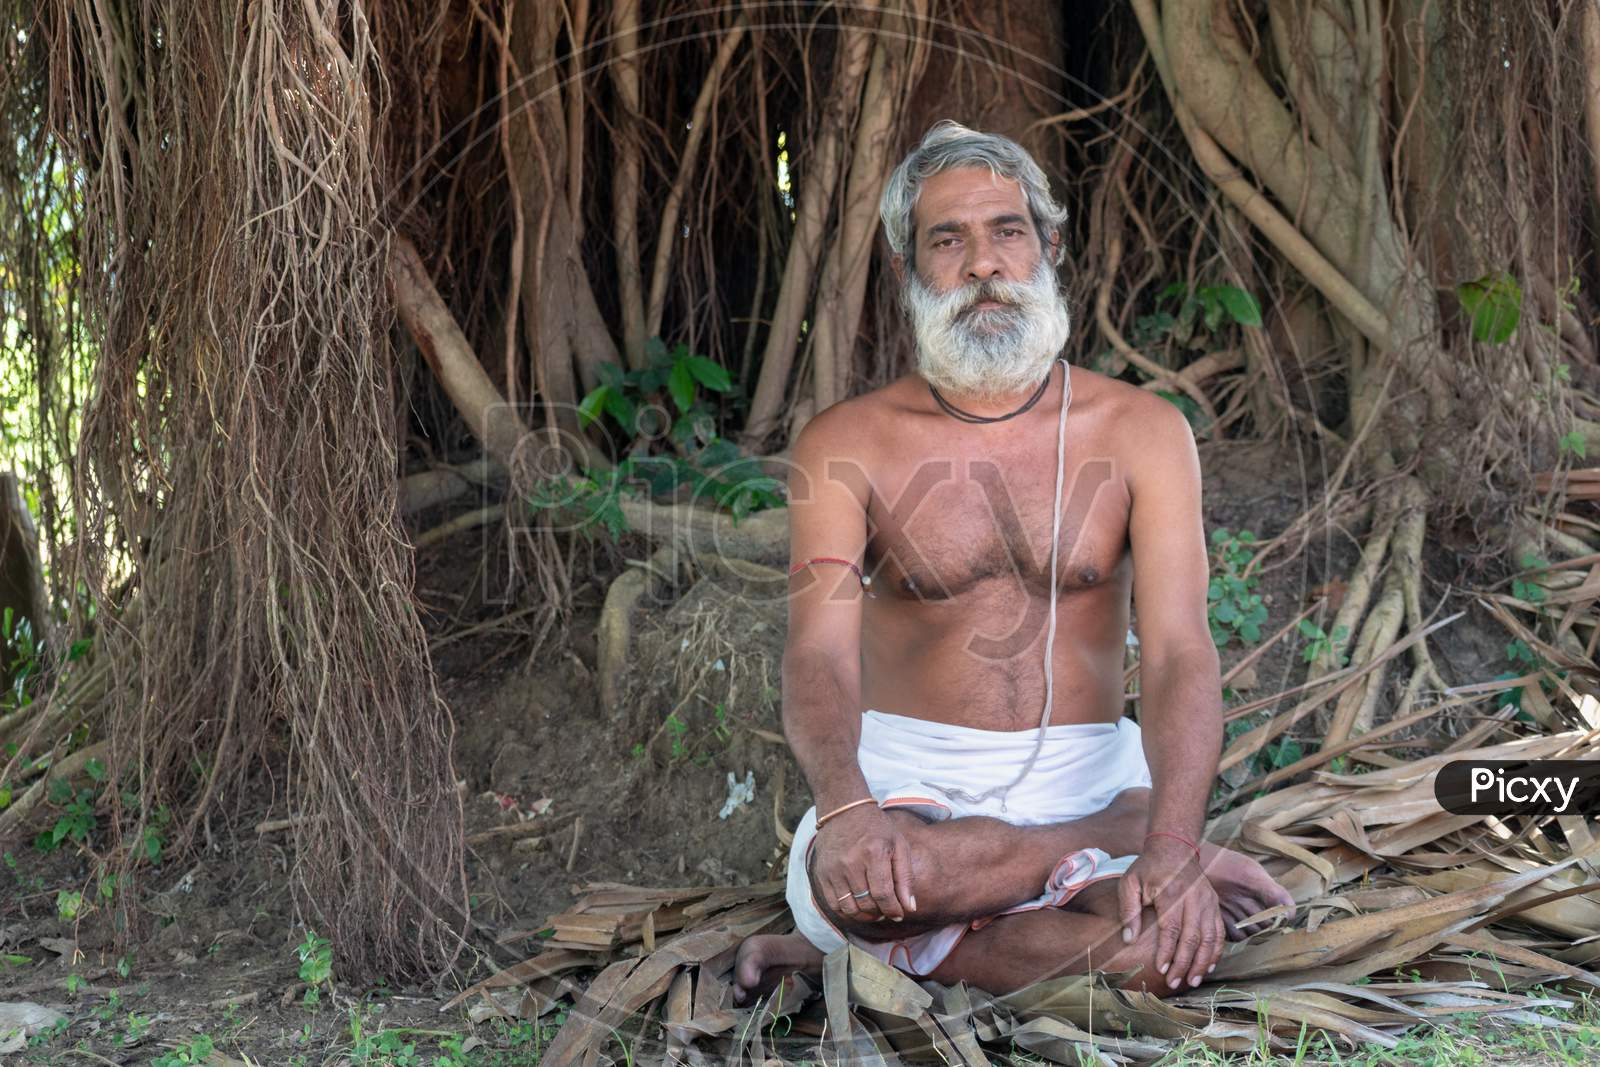 An Indian monk sitting under a banyan tree in a jungle